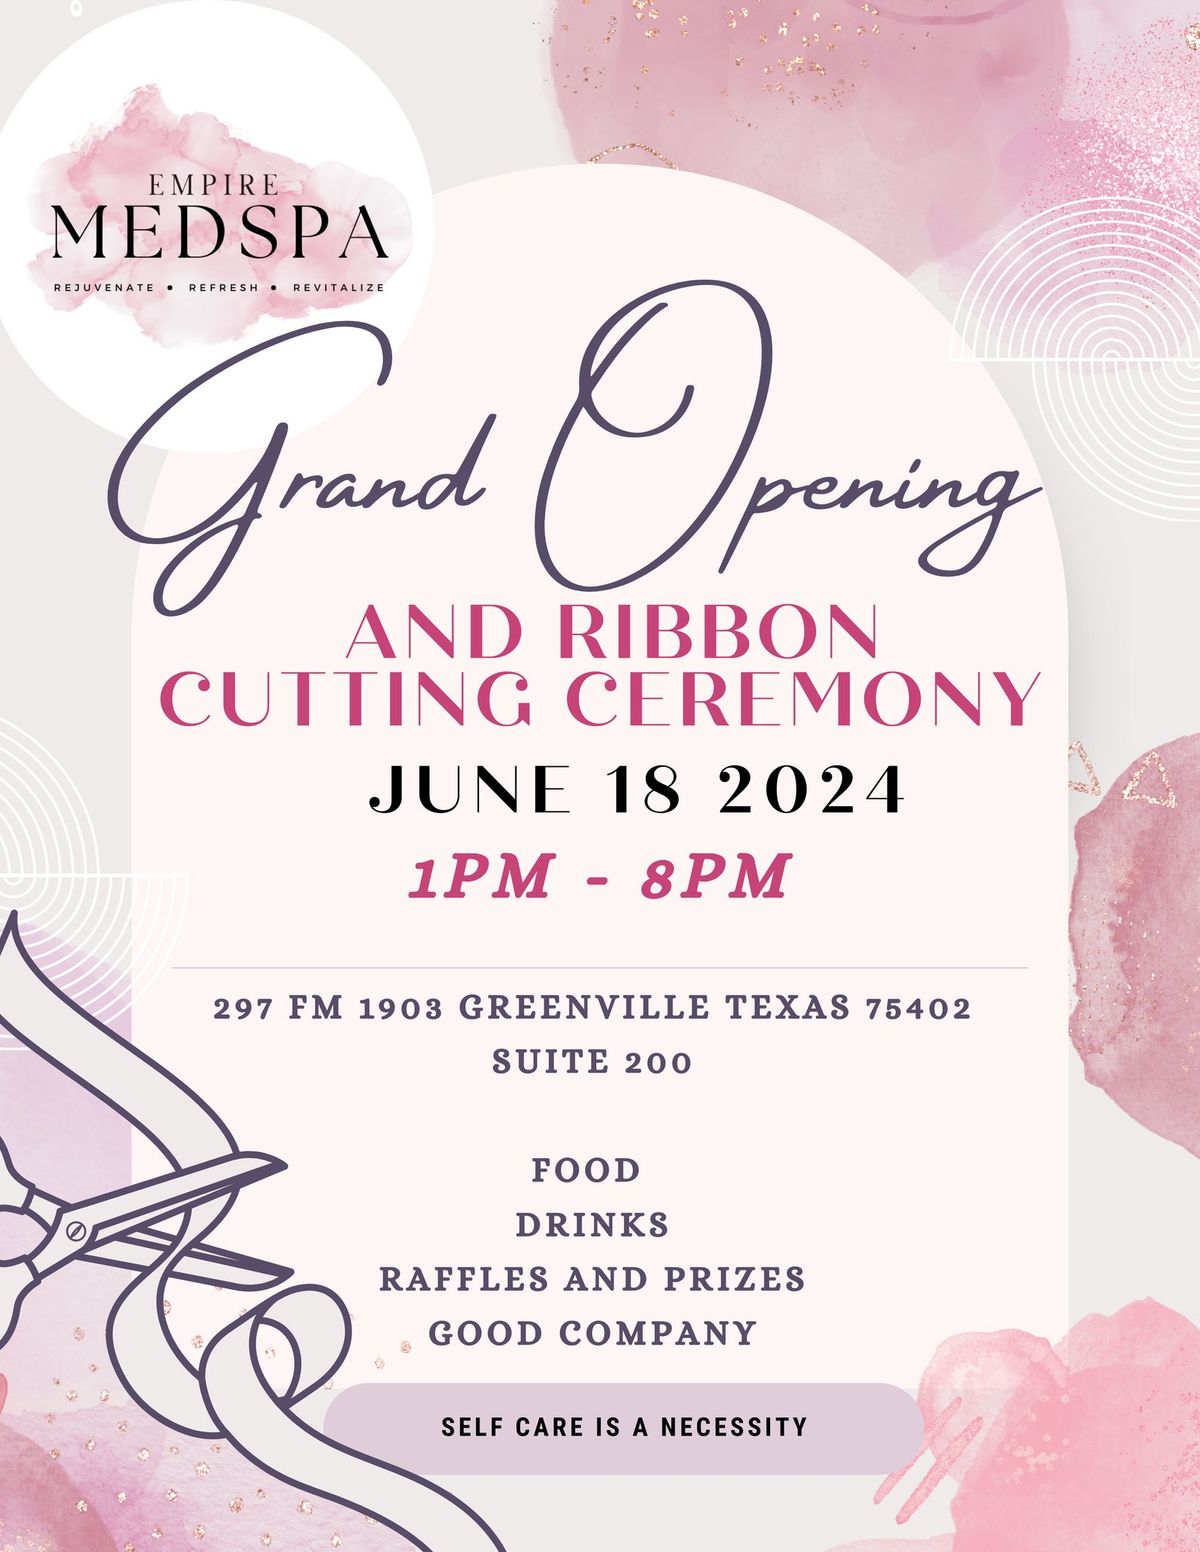 Empire Medspa Grand Opening and Ribbon Cutting Ceremony